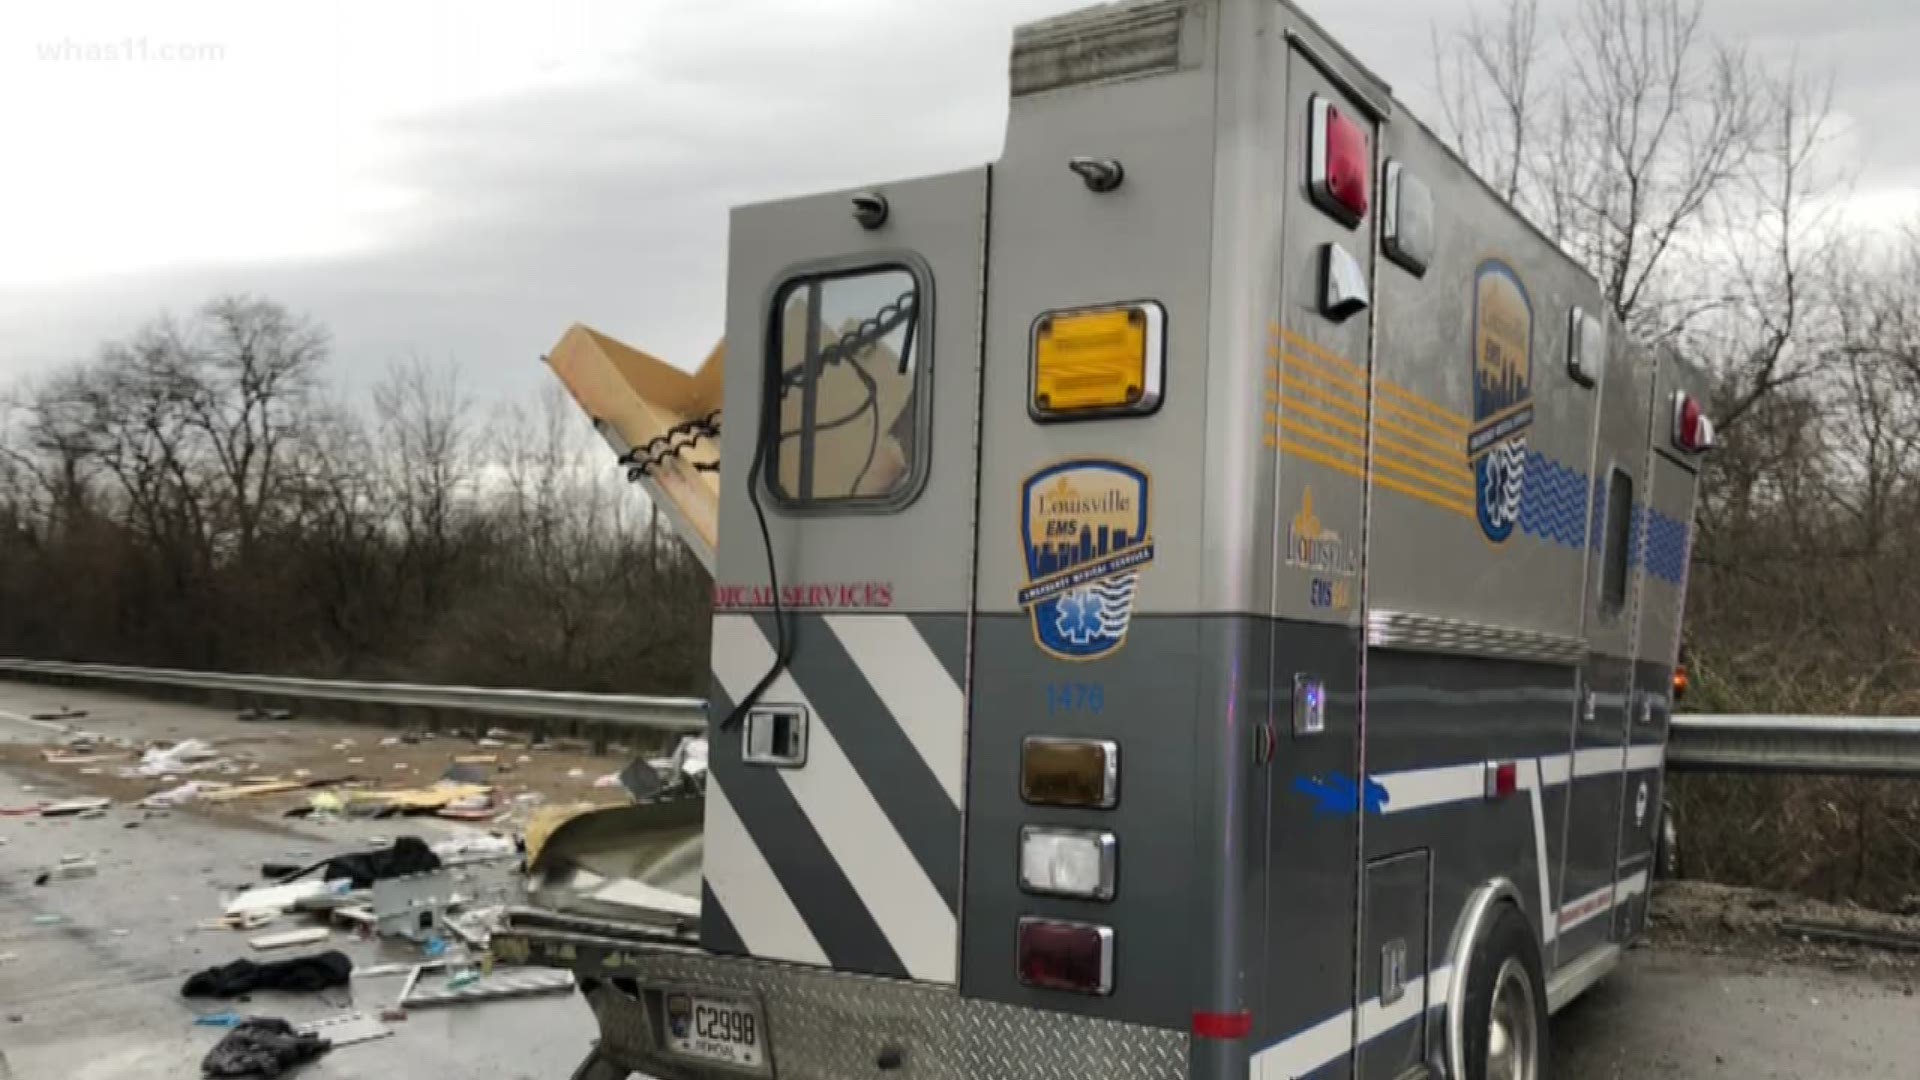 Two EMTs are recovering after suffering injuries in a pileup on the Georgia Davis Powers Highway.